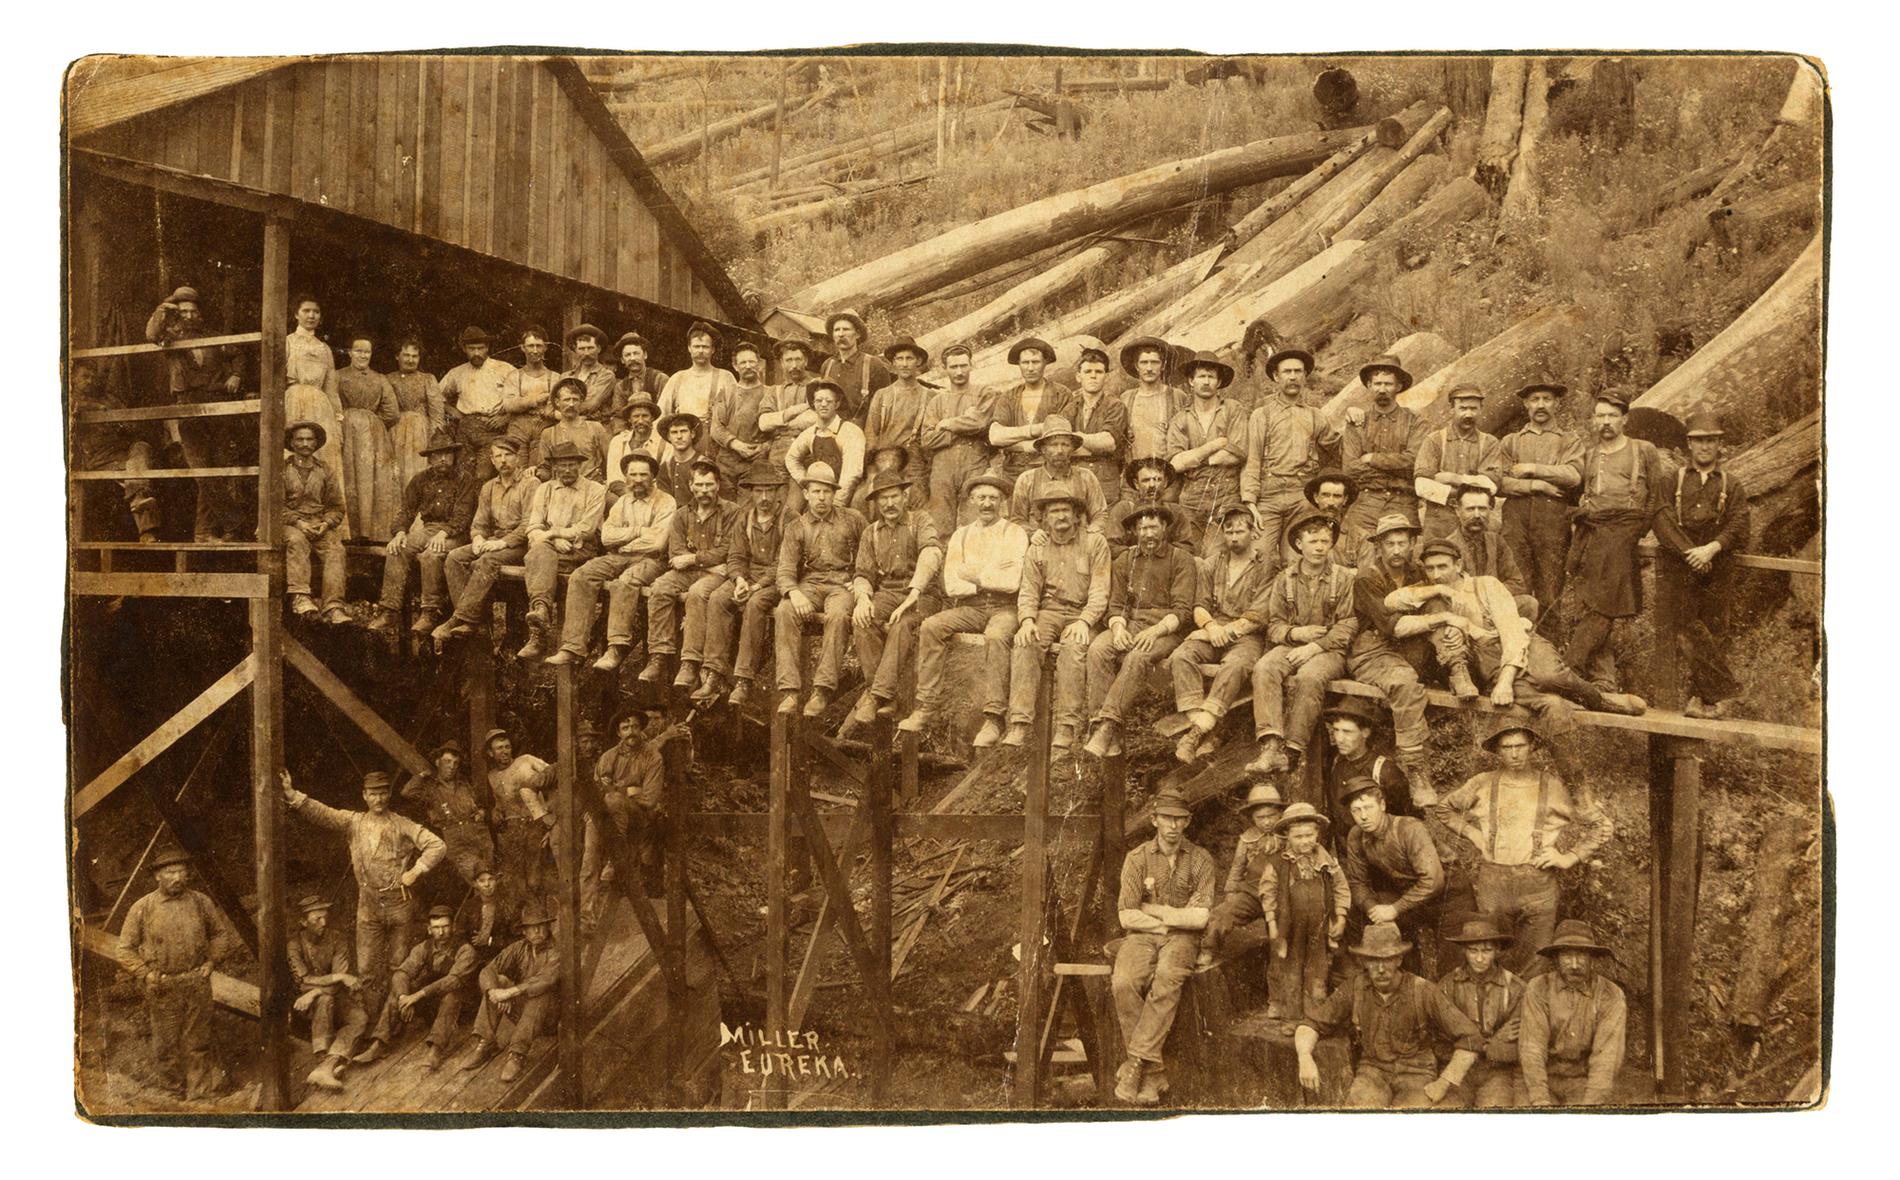 A large group photo of workers on a wooden platform